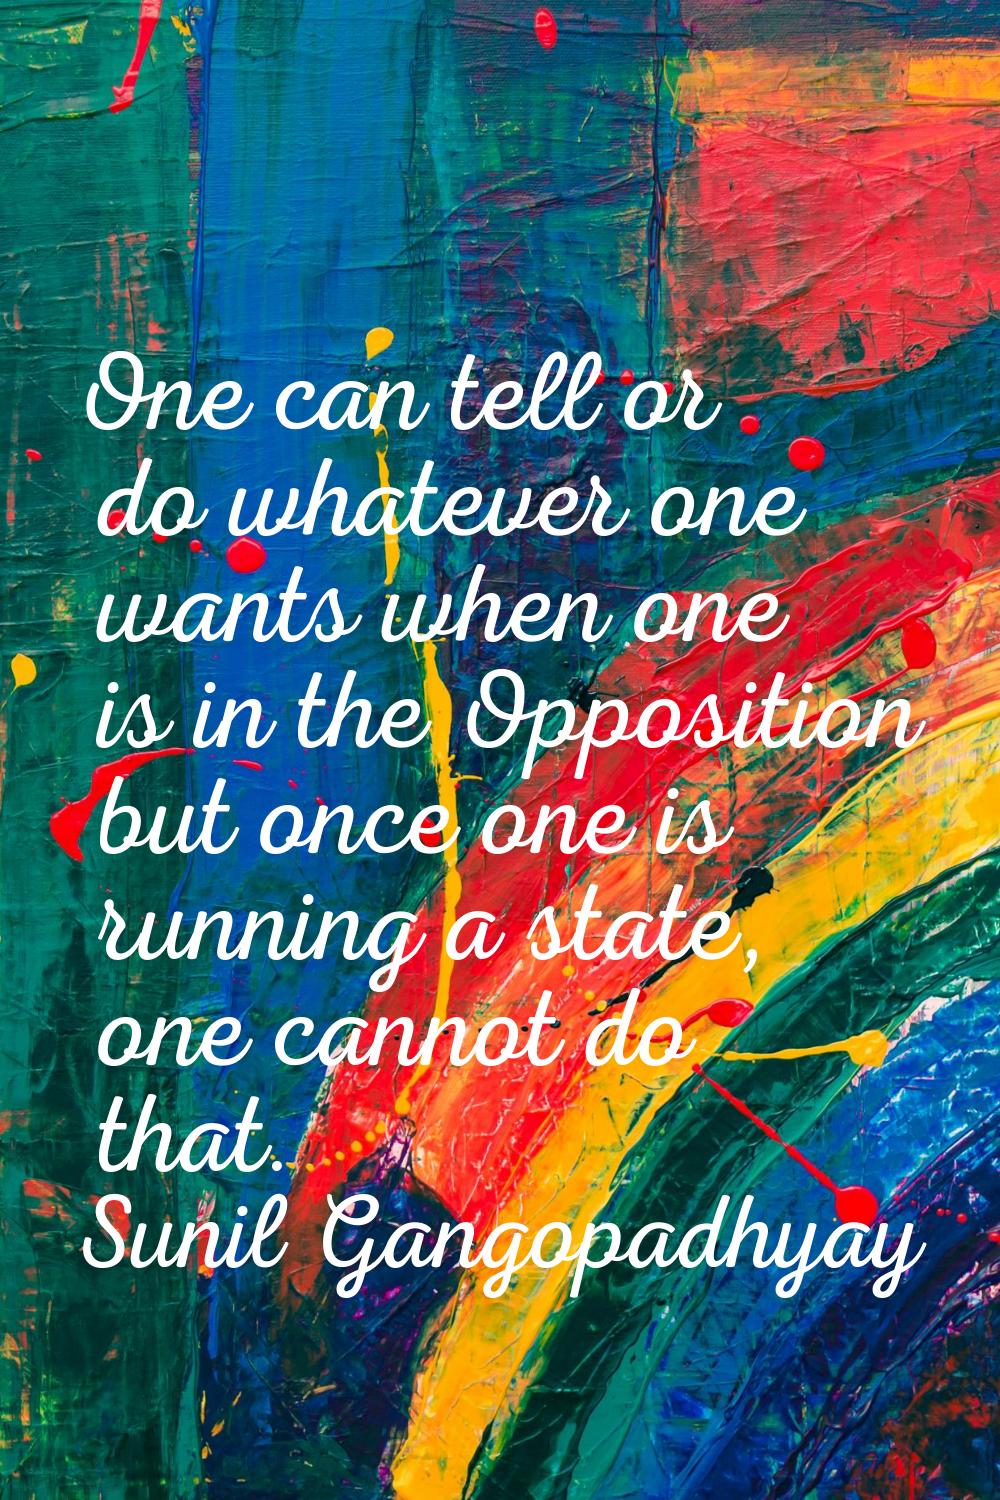 One can tell or do whatever one wants when one is in the Opposition but once one is running a state